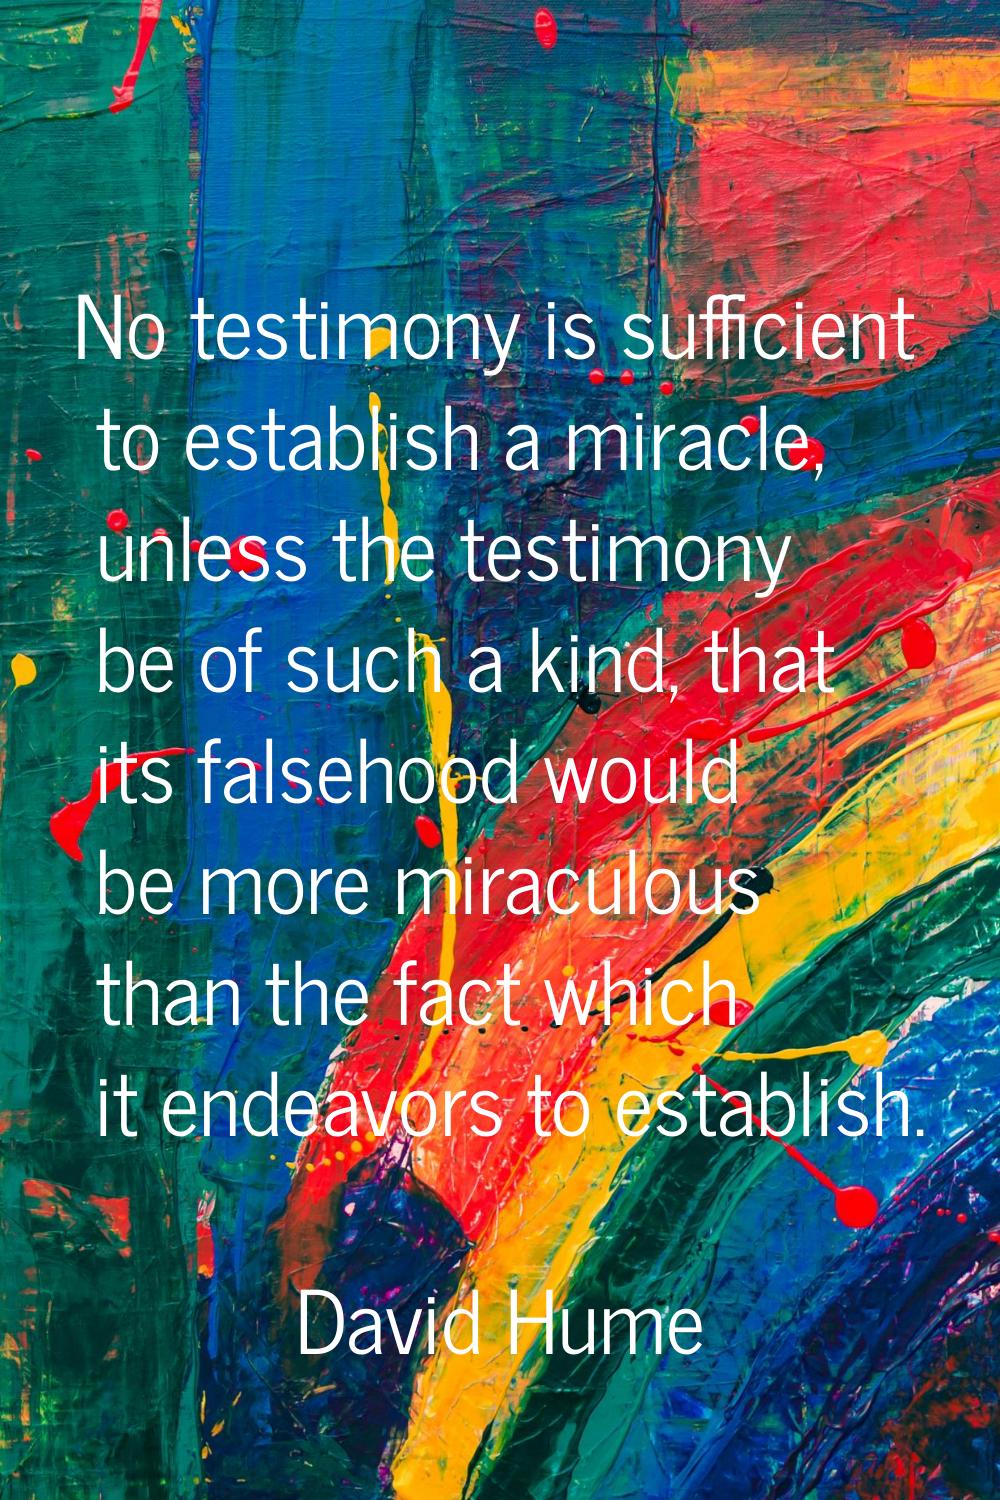 No testimony is sufficient to establish a miracle, unless the testimony be of such a kind, that its